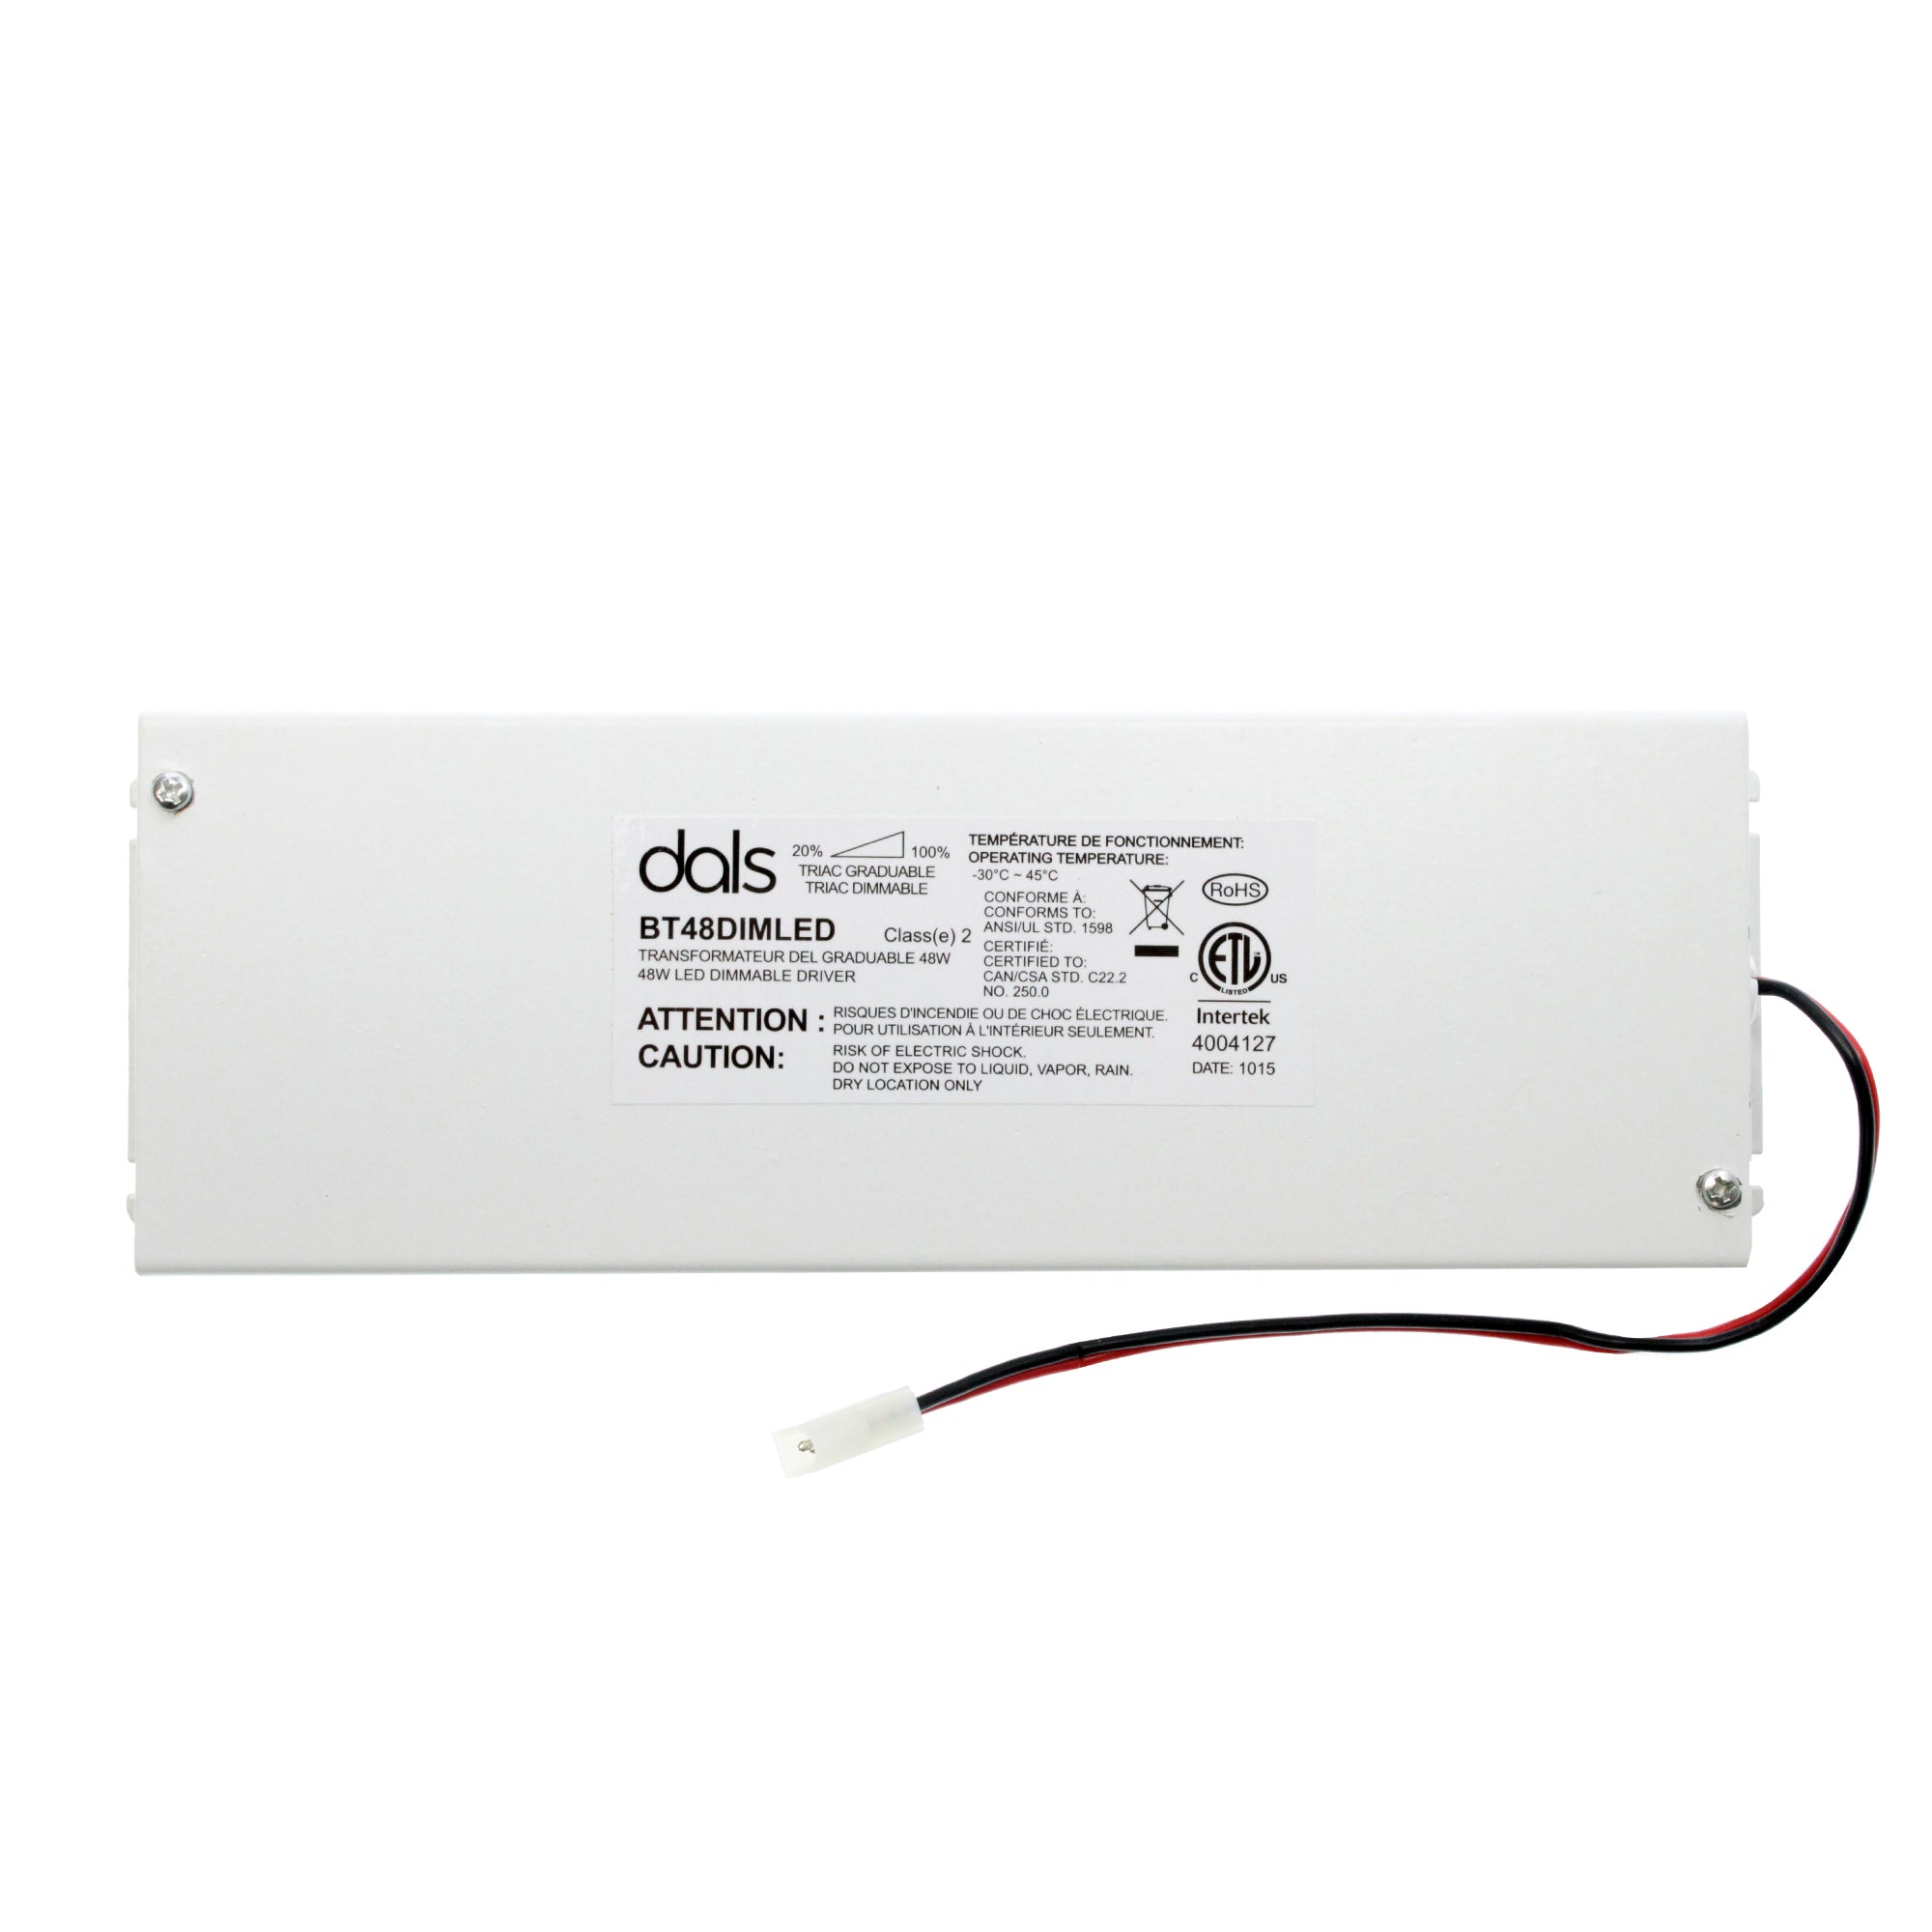 Dals, DALS BT48DIMLED TRIAC DIMMABLE LED DRIVER, 48-WATT, 12-VDC, ENCLOSED